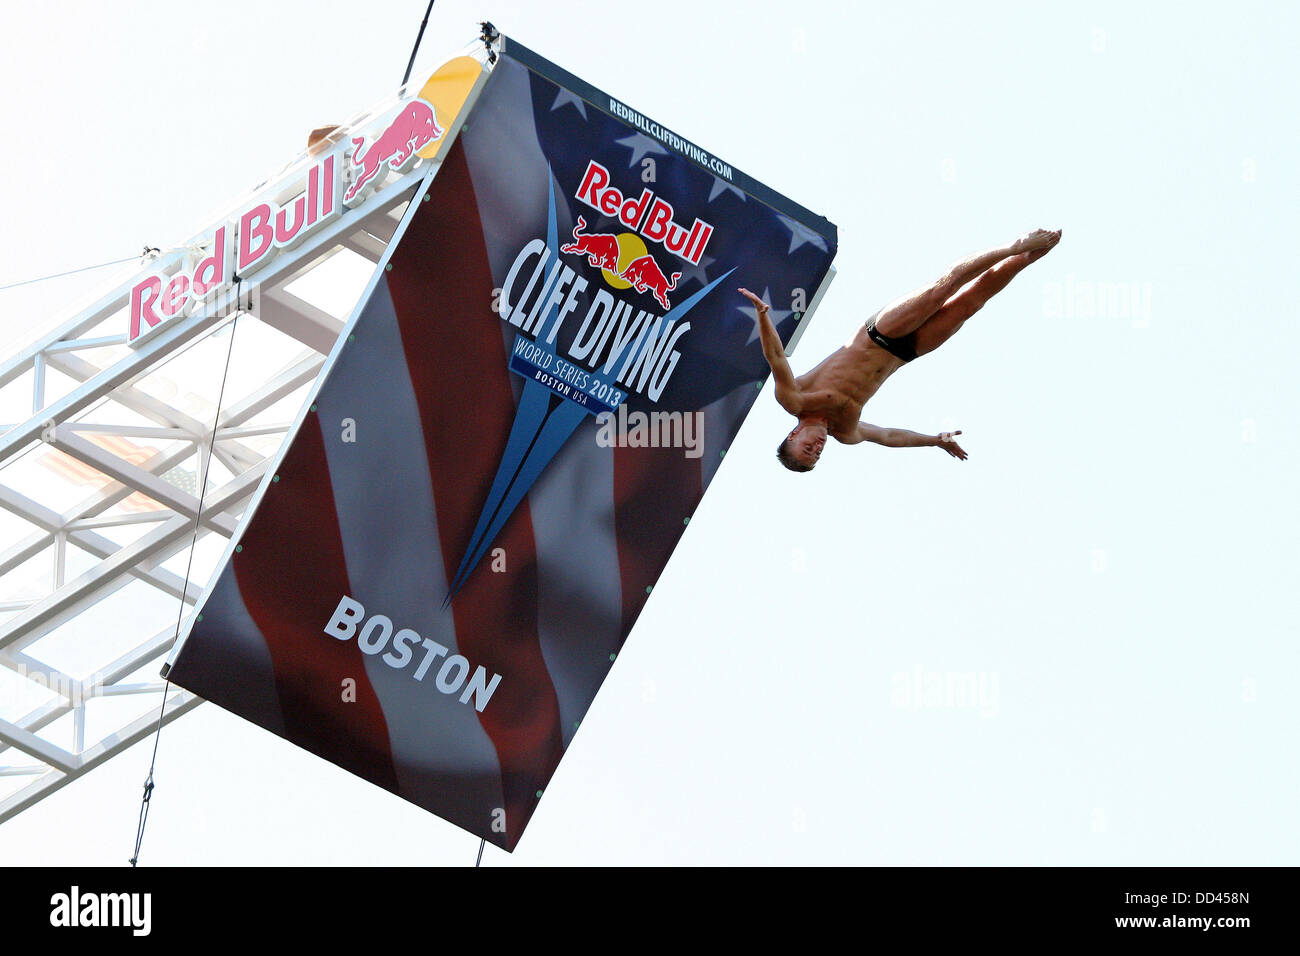 Boston, Massachusetts, USA. 25th Aug, 2013. Cliff Divers compete during the Red Bull Cliff Diving World Series at the Institute of Contemporary Art building in Boston, Massachusetts. Anthony Nesmith/CSM/Alamy Live News Stock Photo